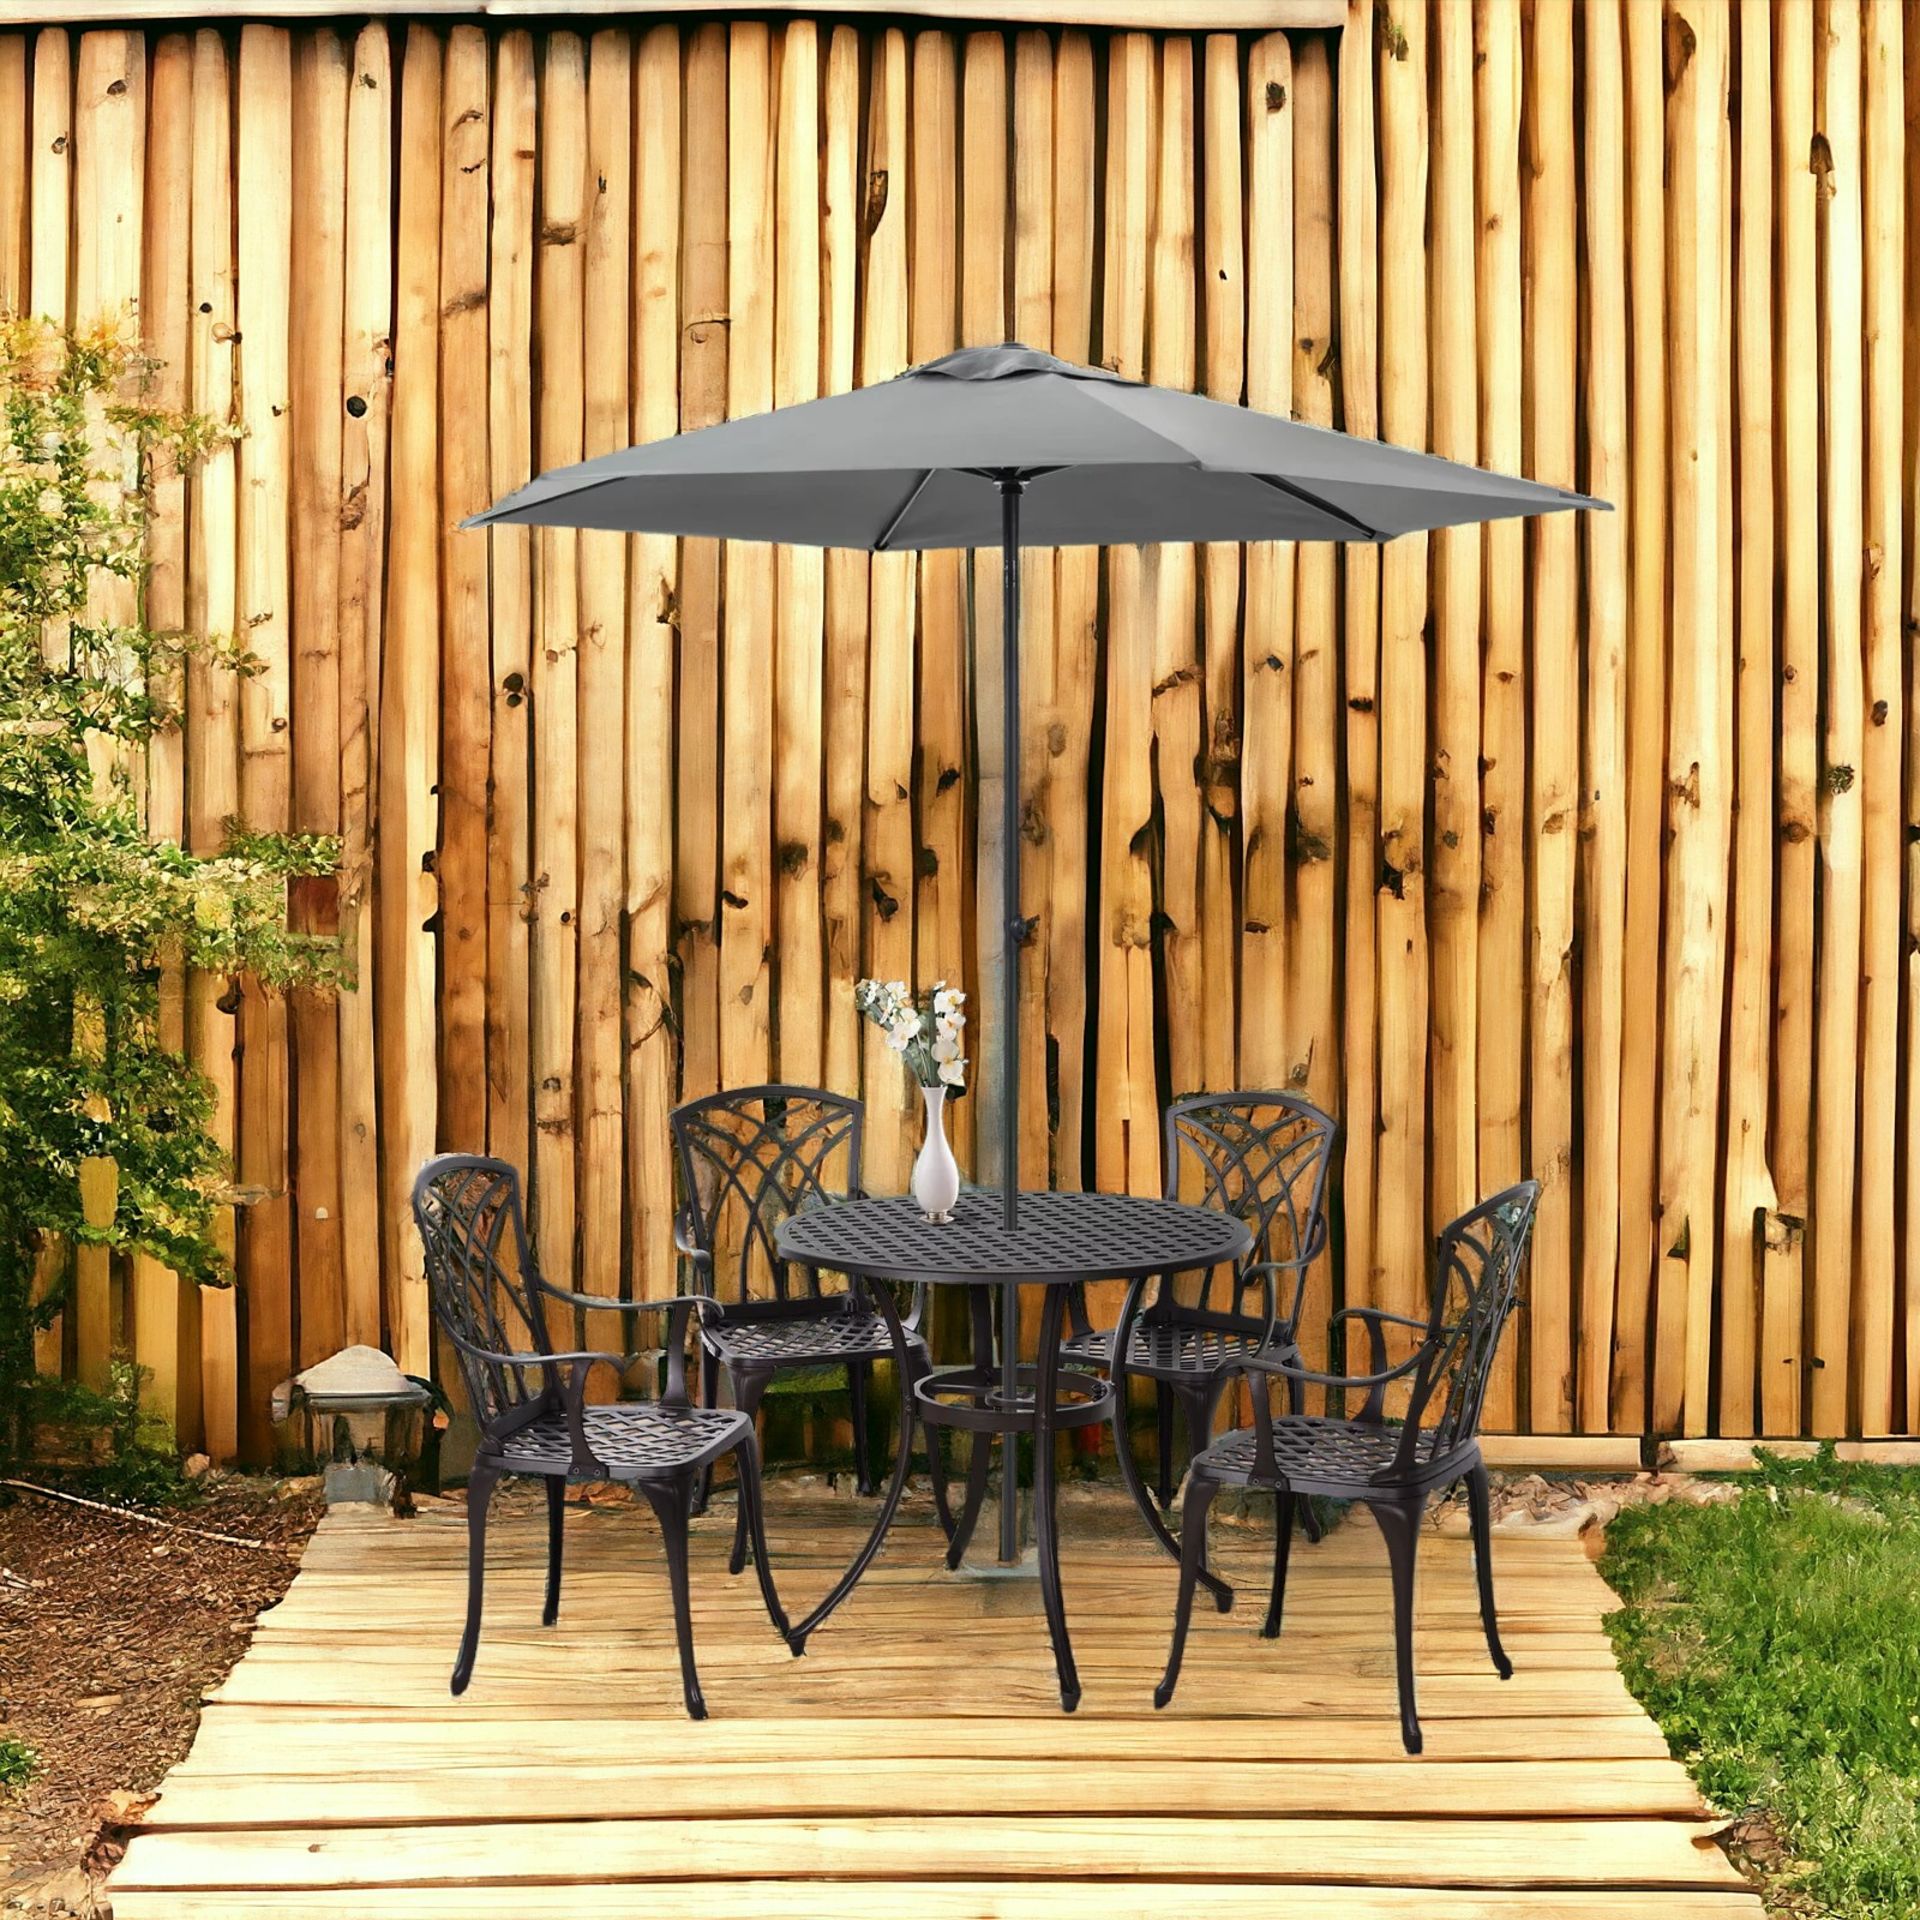 FREE DELIVERY- BRAND NEW 5 PCS COFFEE TABLE CHAIRS OUTDOOR GARDEN FURNITURE SET W/ - Image 3 of 3